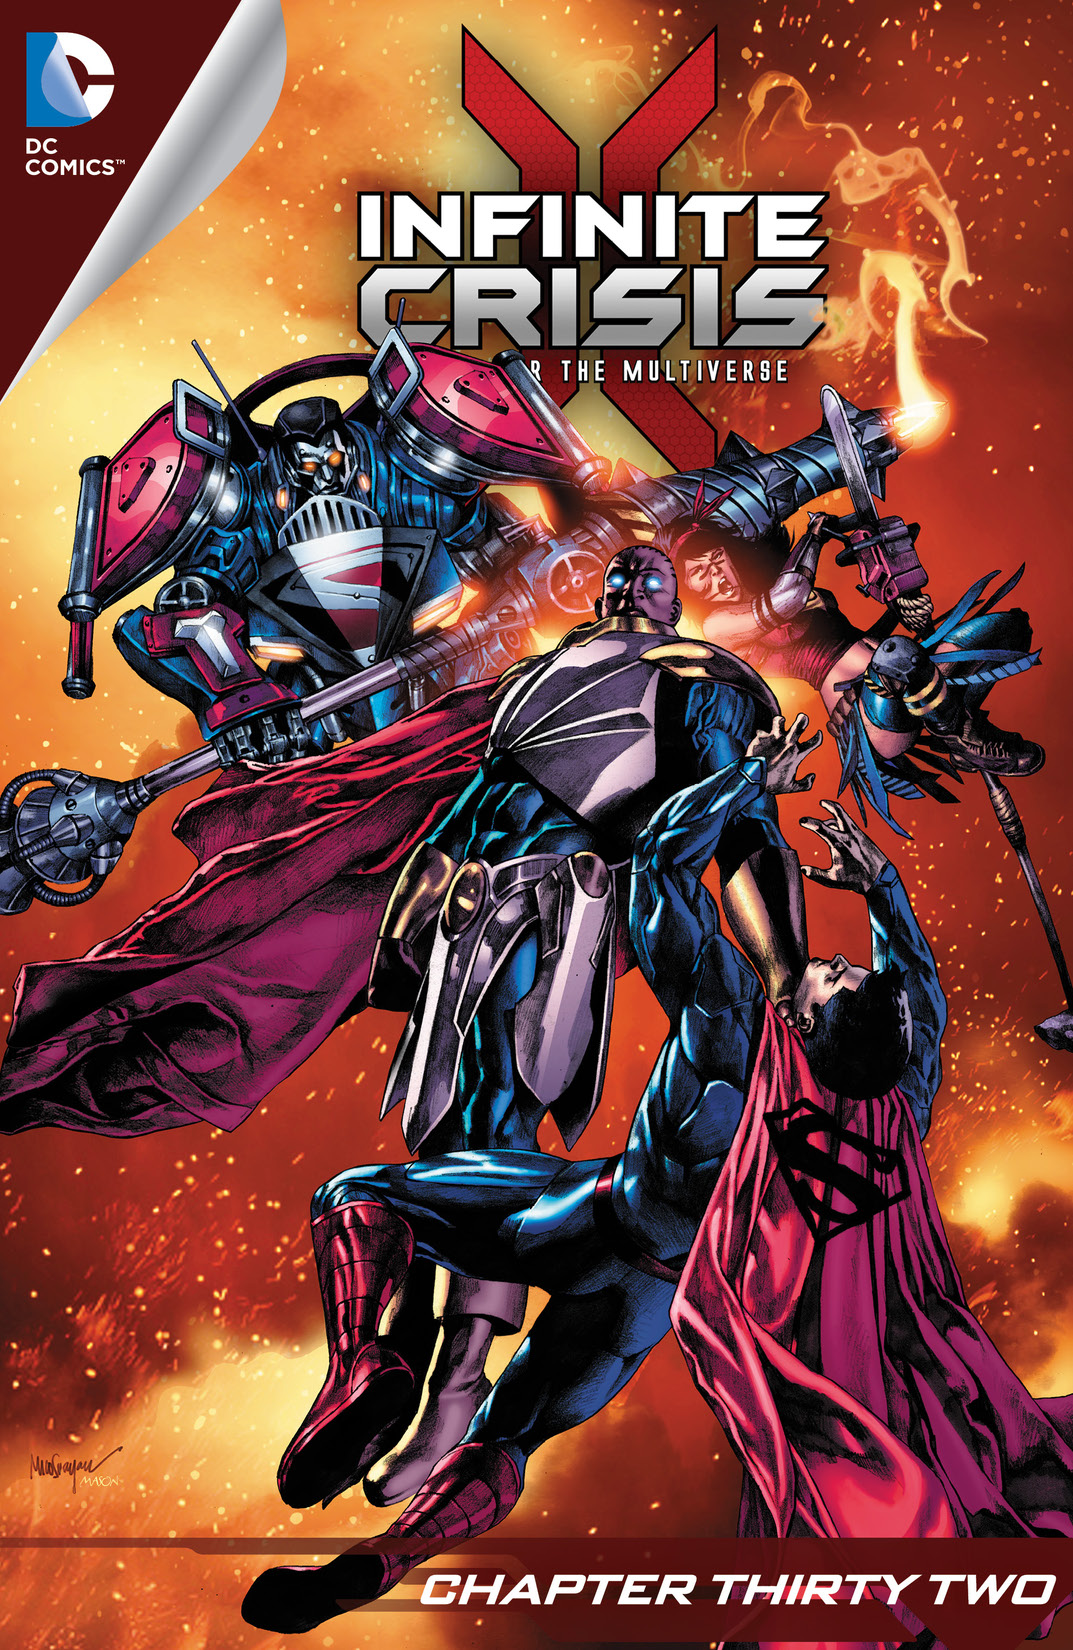 Infinite Crisis: Fight for the Multiverse #32 preview images